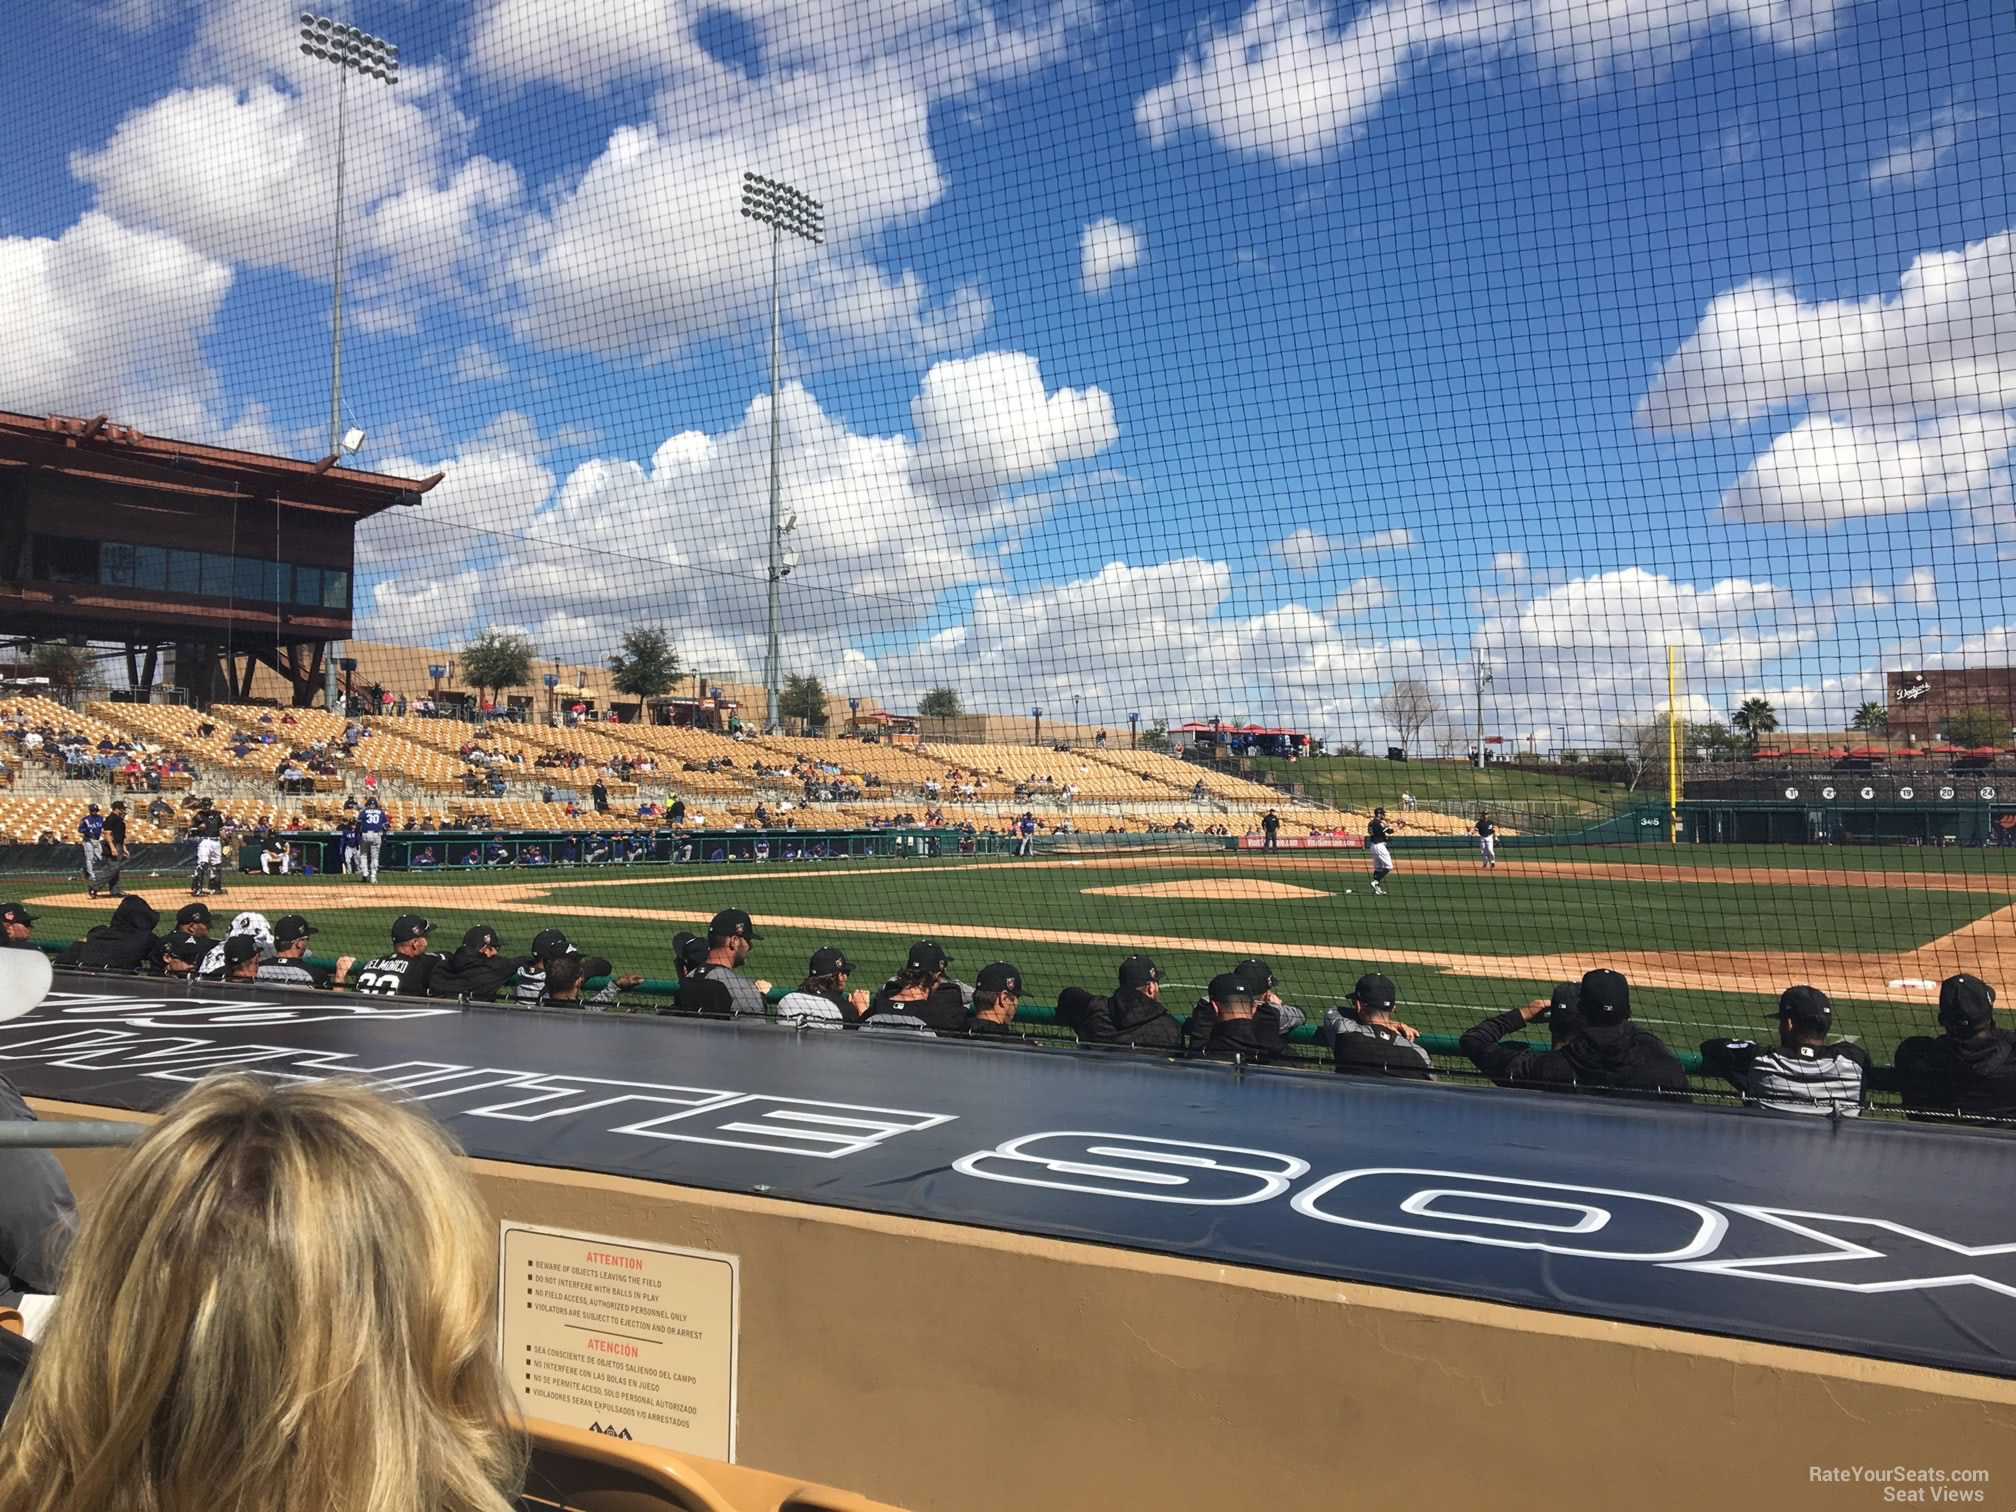 section 7, row 6 seat view  - camelback ranch